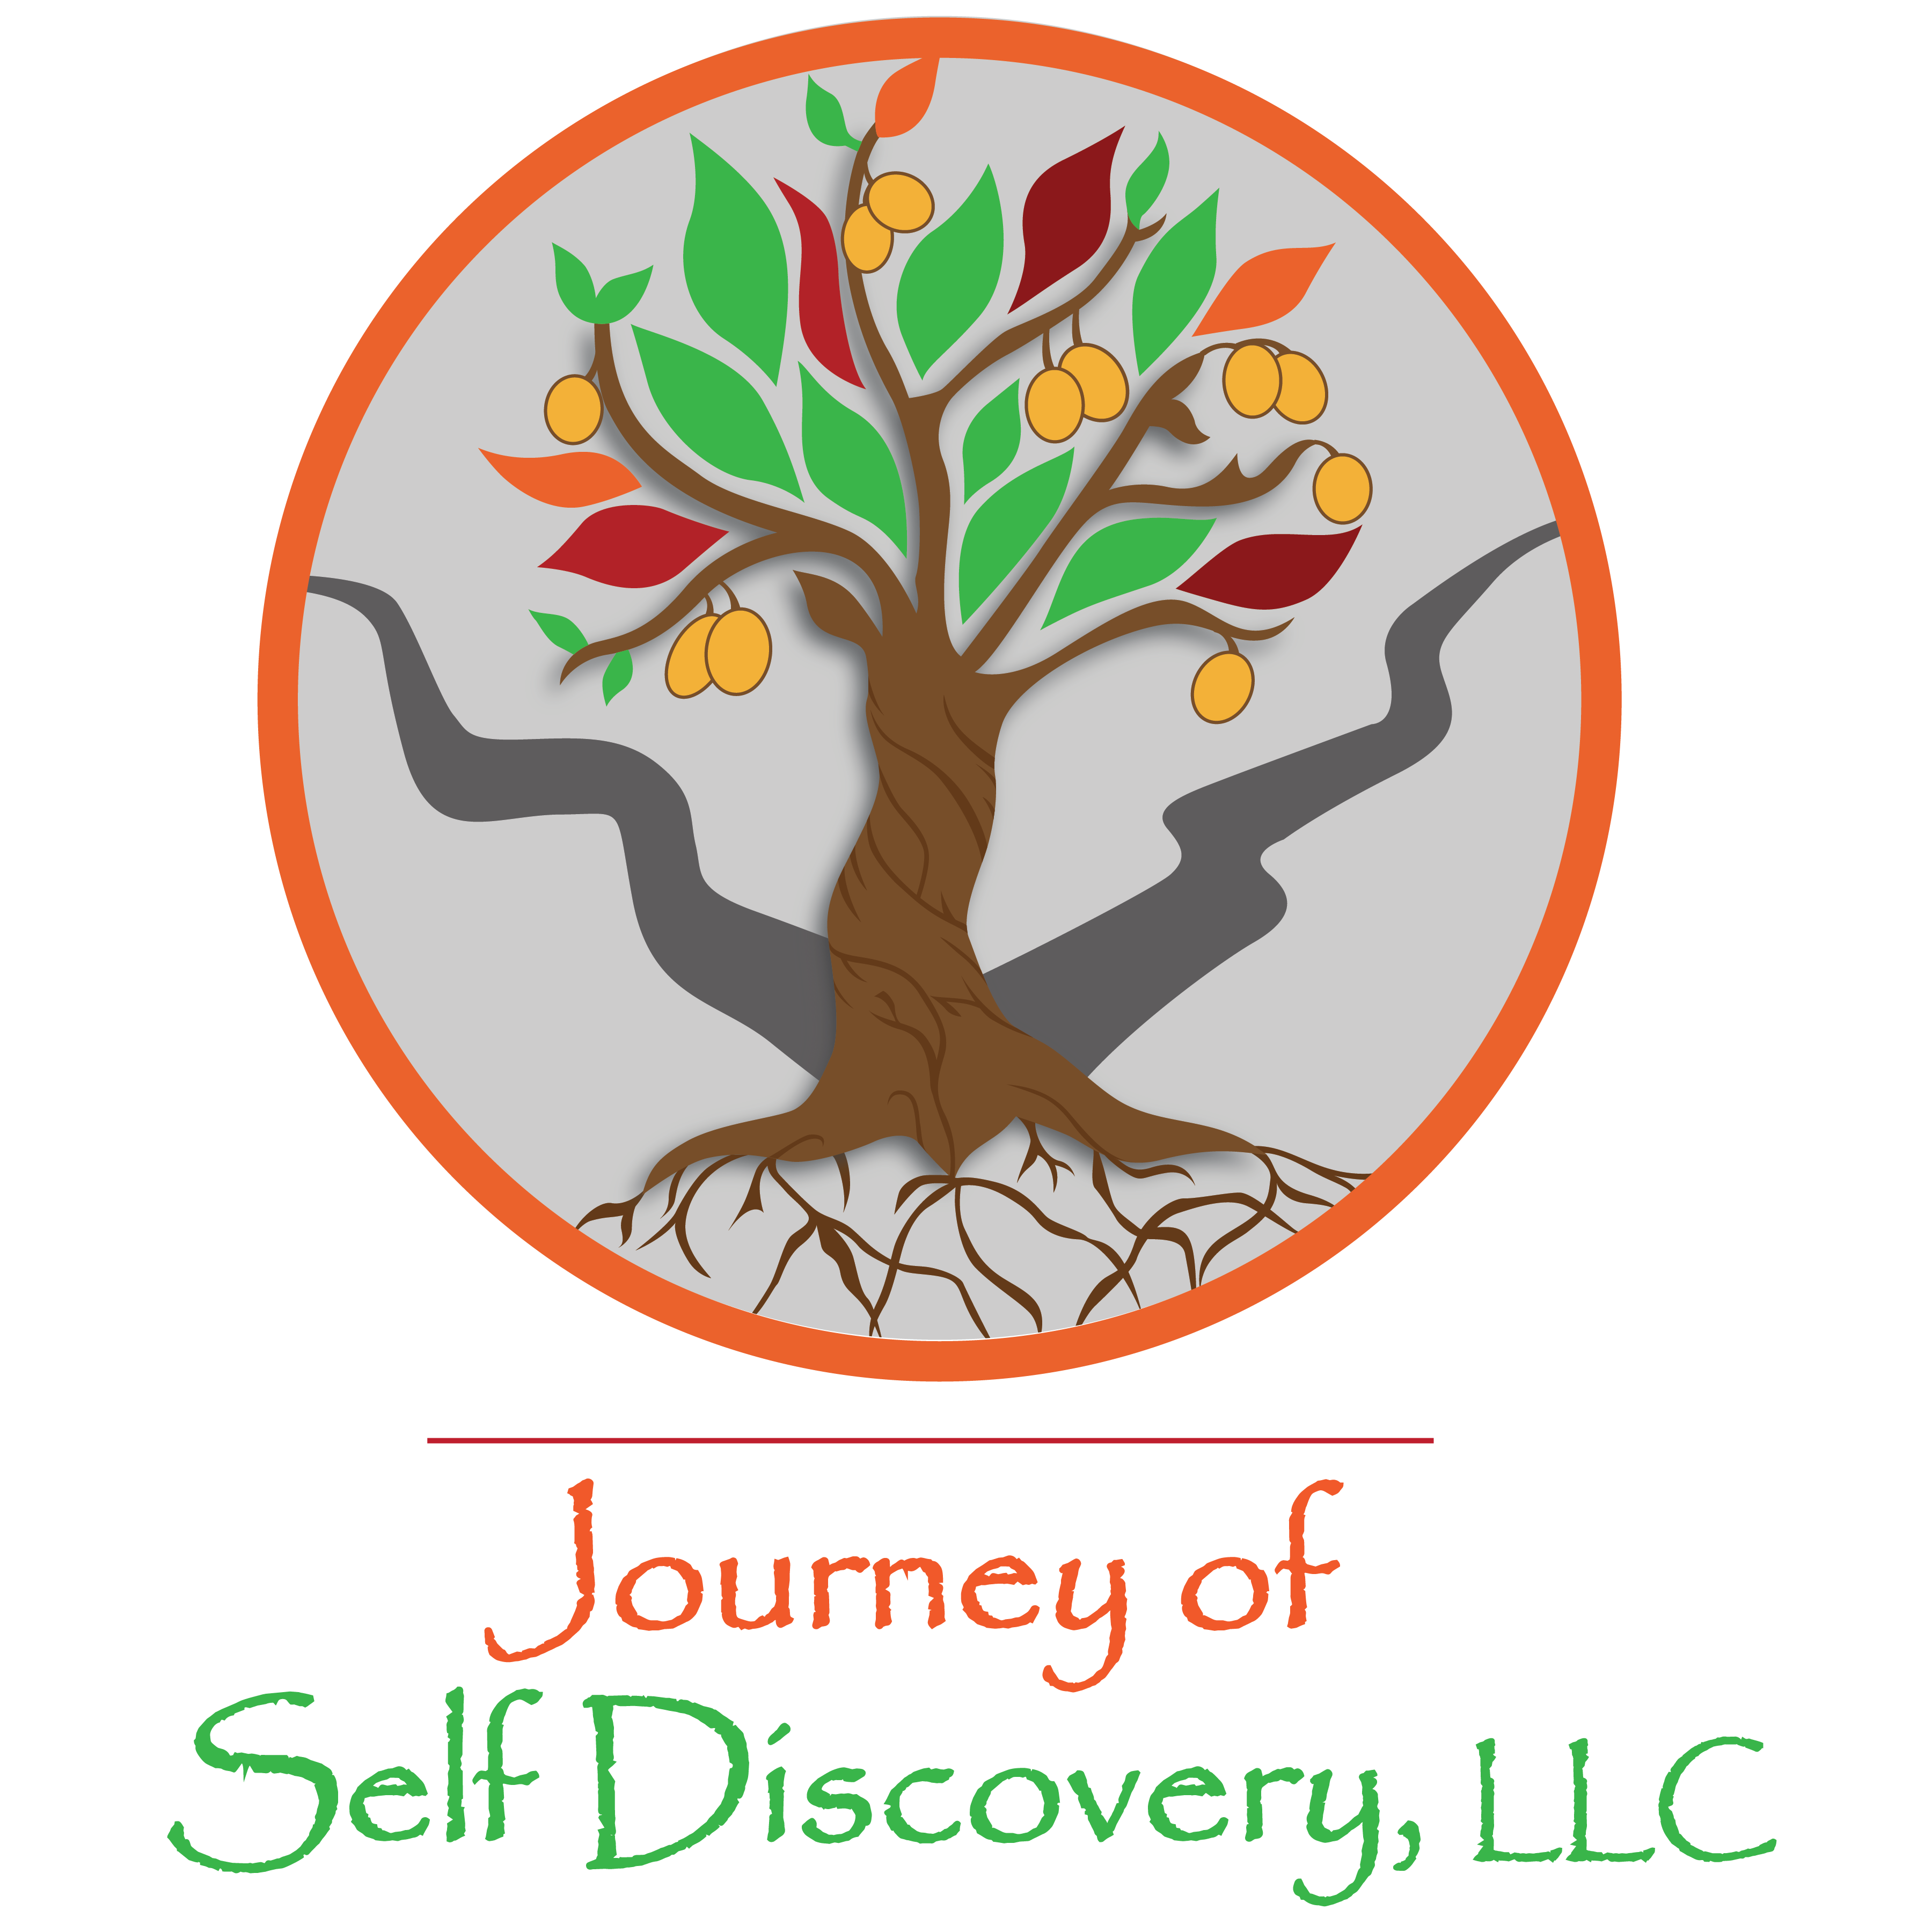 reflection clipart self discovery